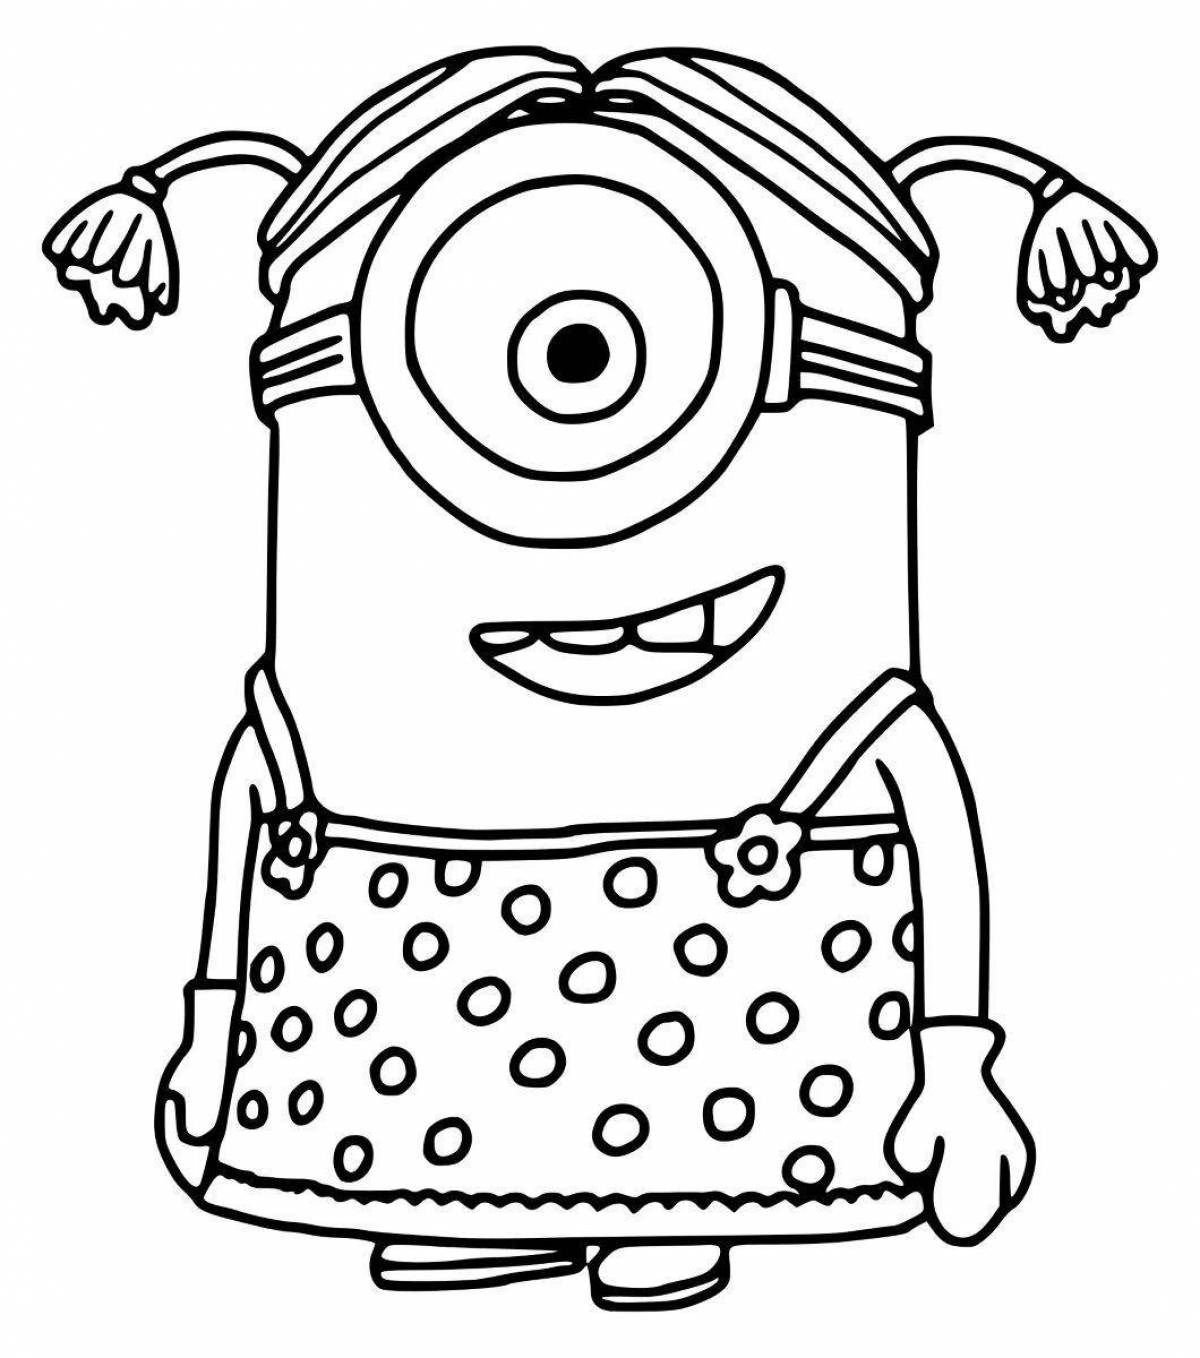 Colorful coloring of minions